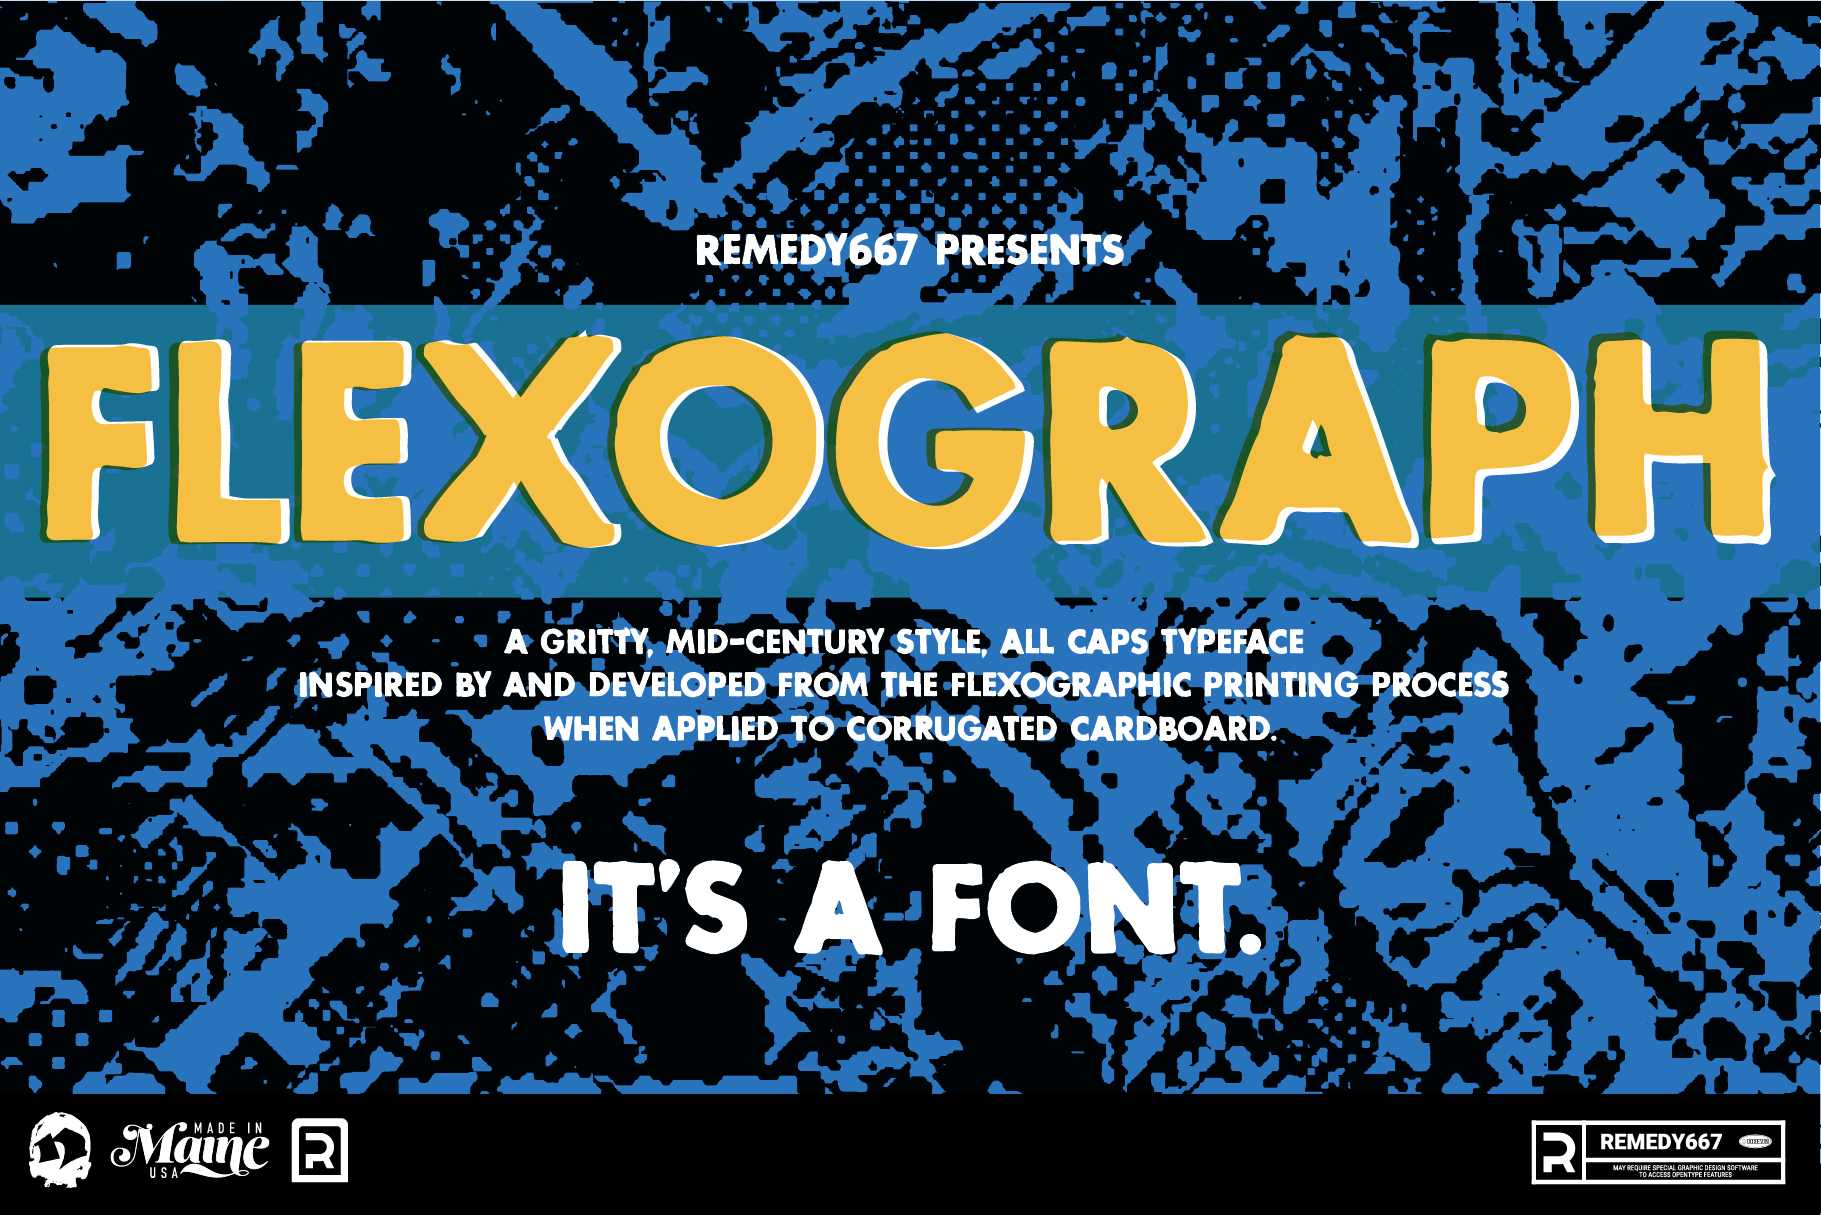 Remedy667 Presents Flexograph. A gritty, mid-century style, all caps typeface inspired by and developed from the flexographic printing process when applied to corrugated cardboard. It's a Font.